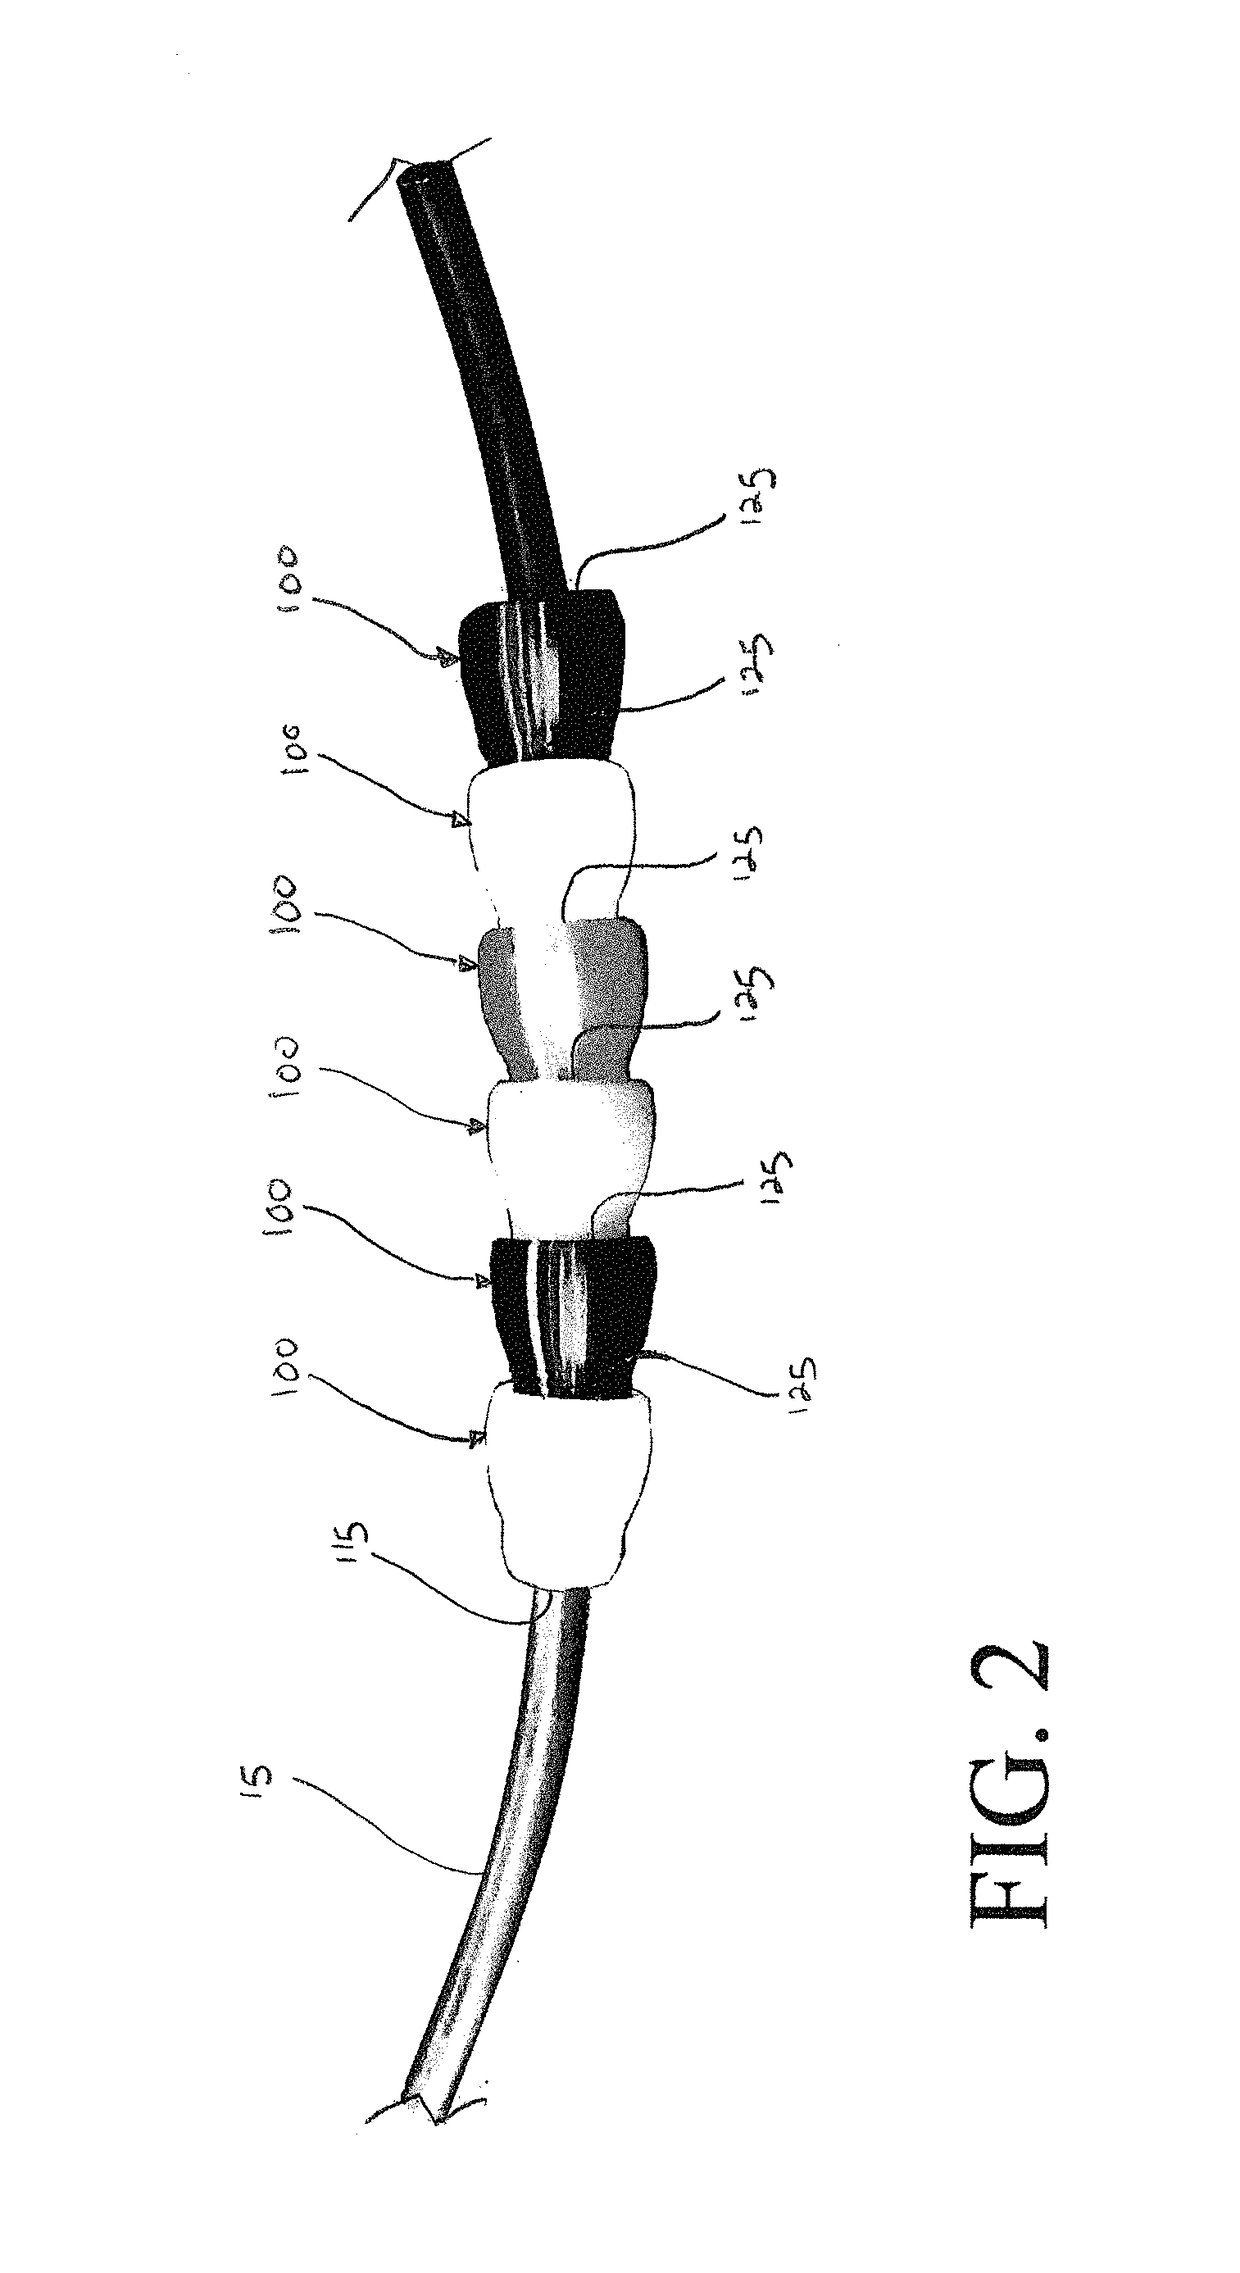 Protective component for power cable of an industrial electro-magnetic lifting device